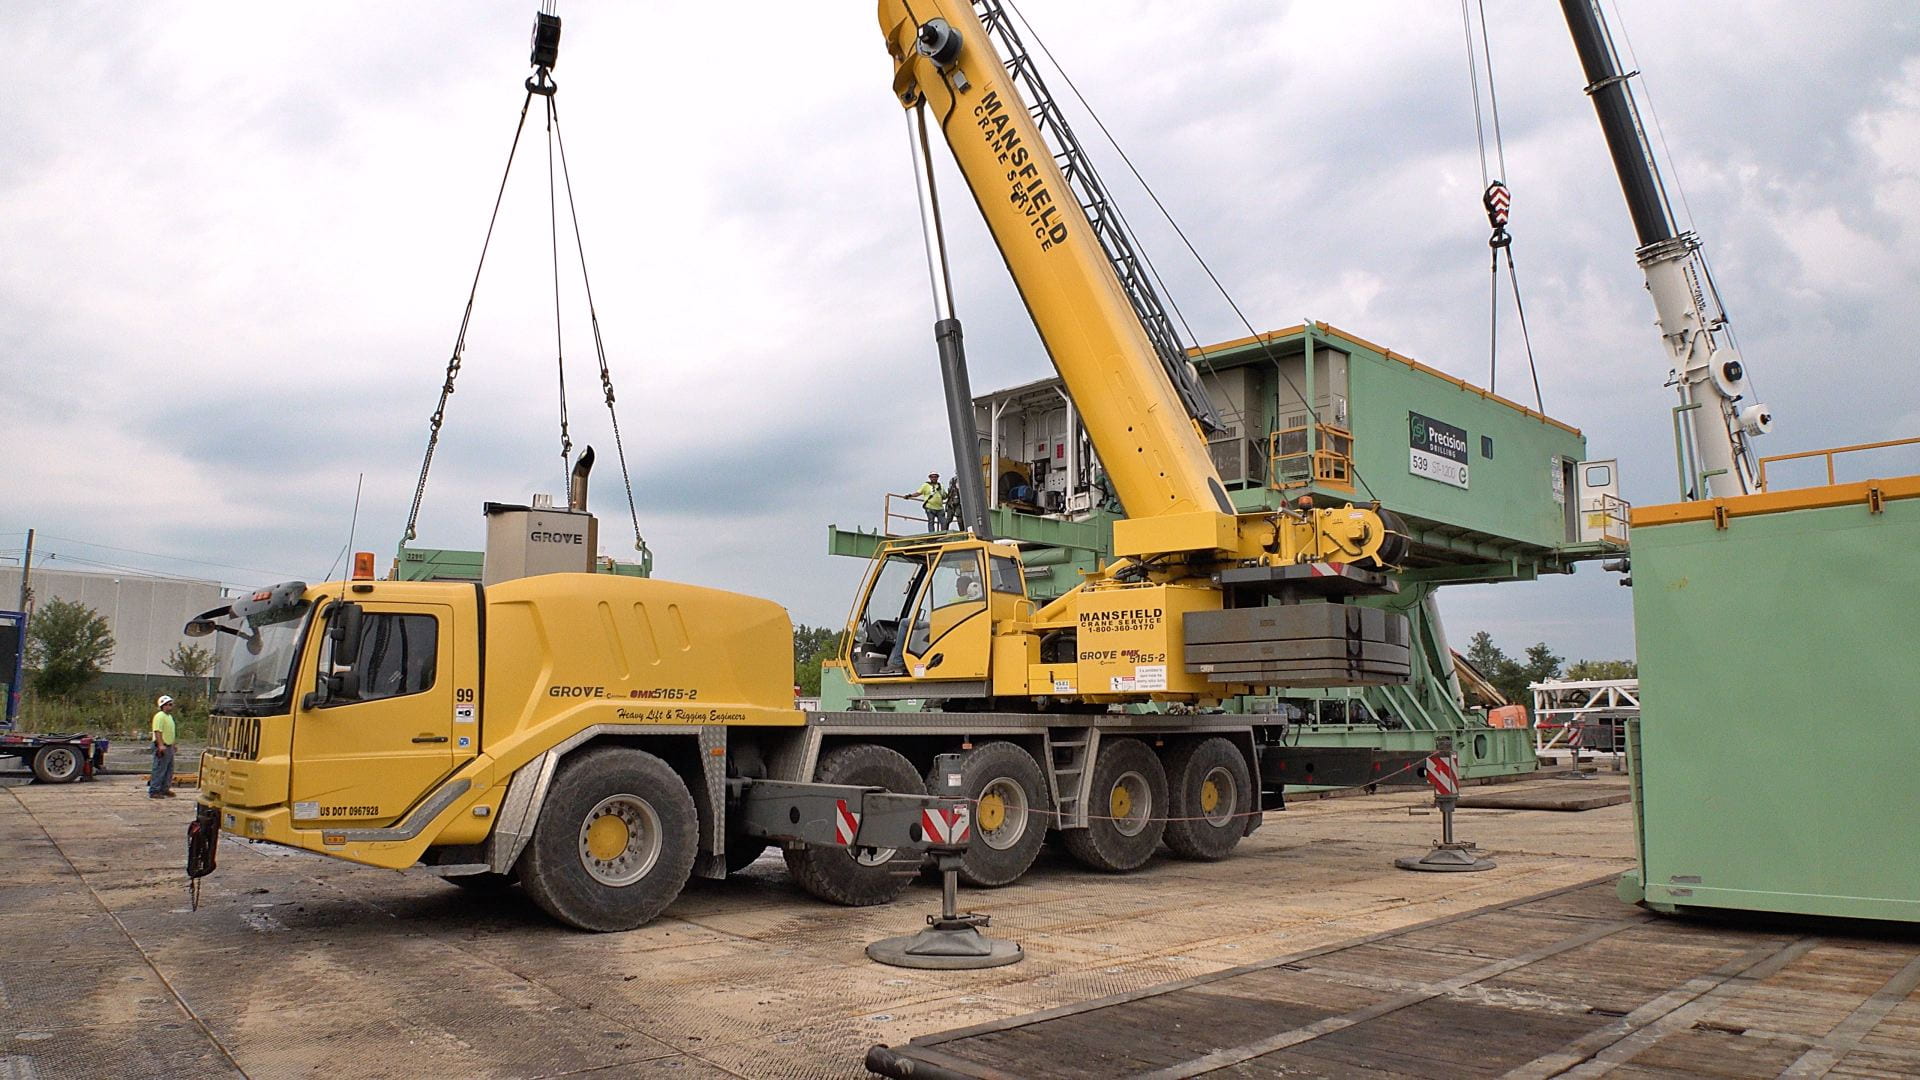 One of the trailer units is lifted by crane for removal from the CUBO site.